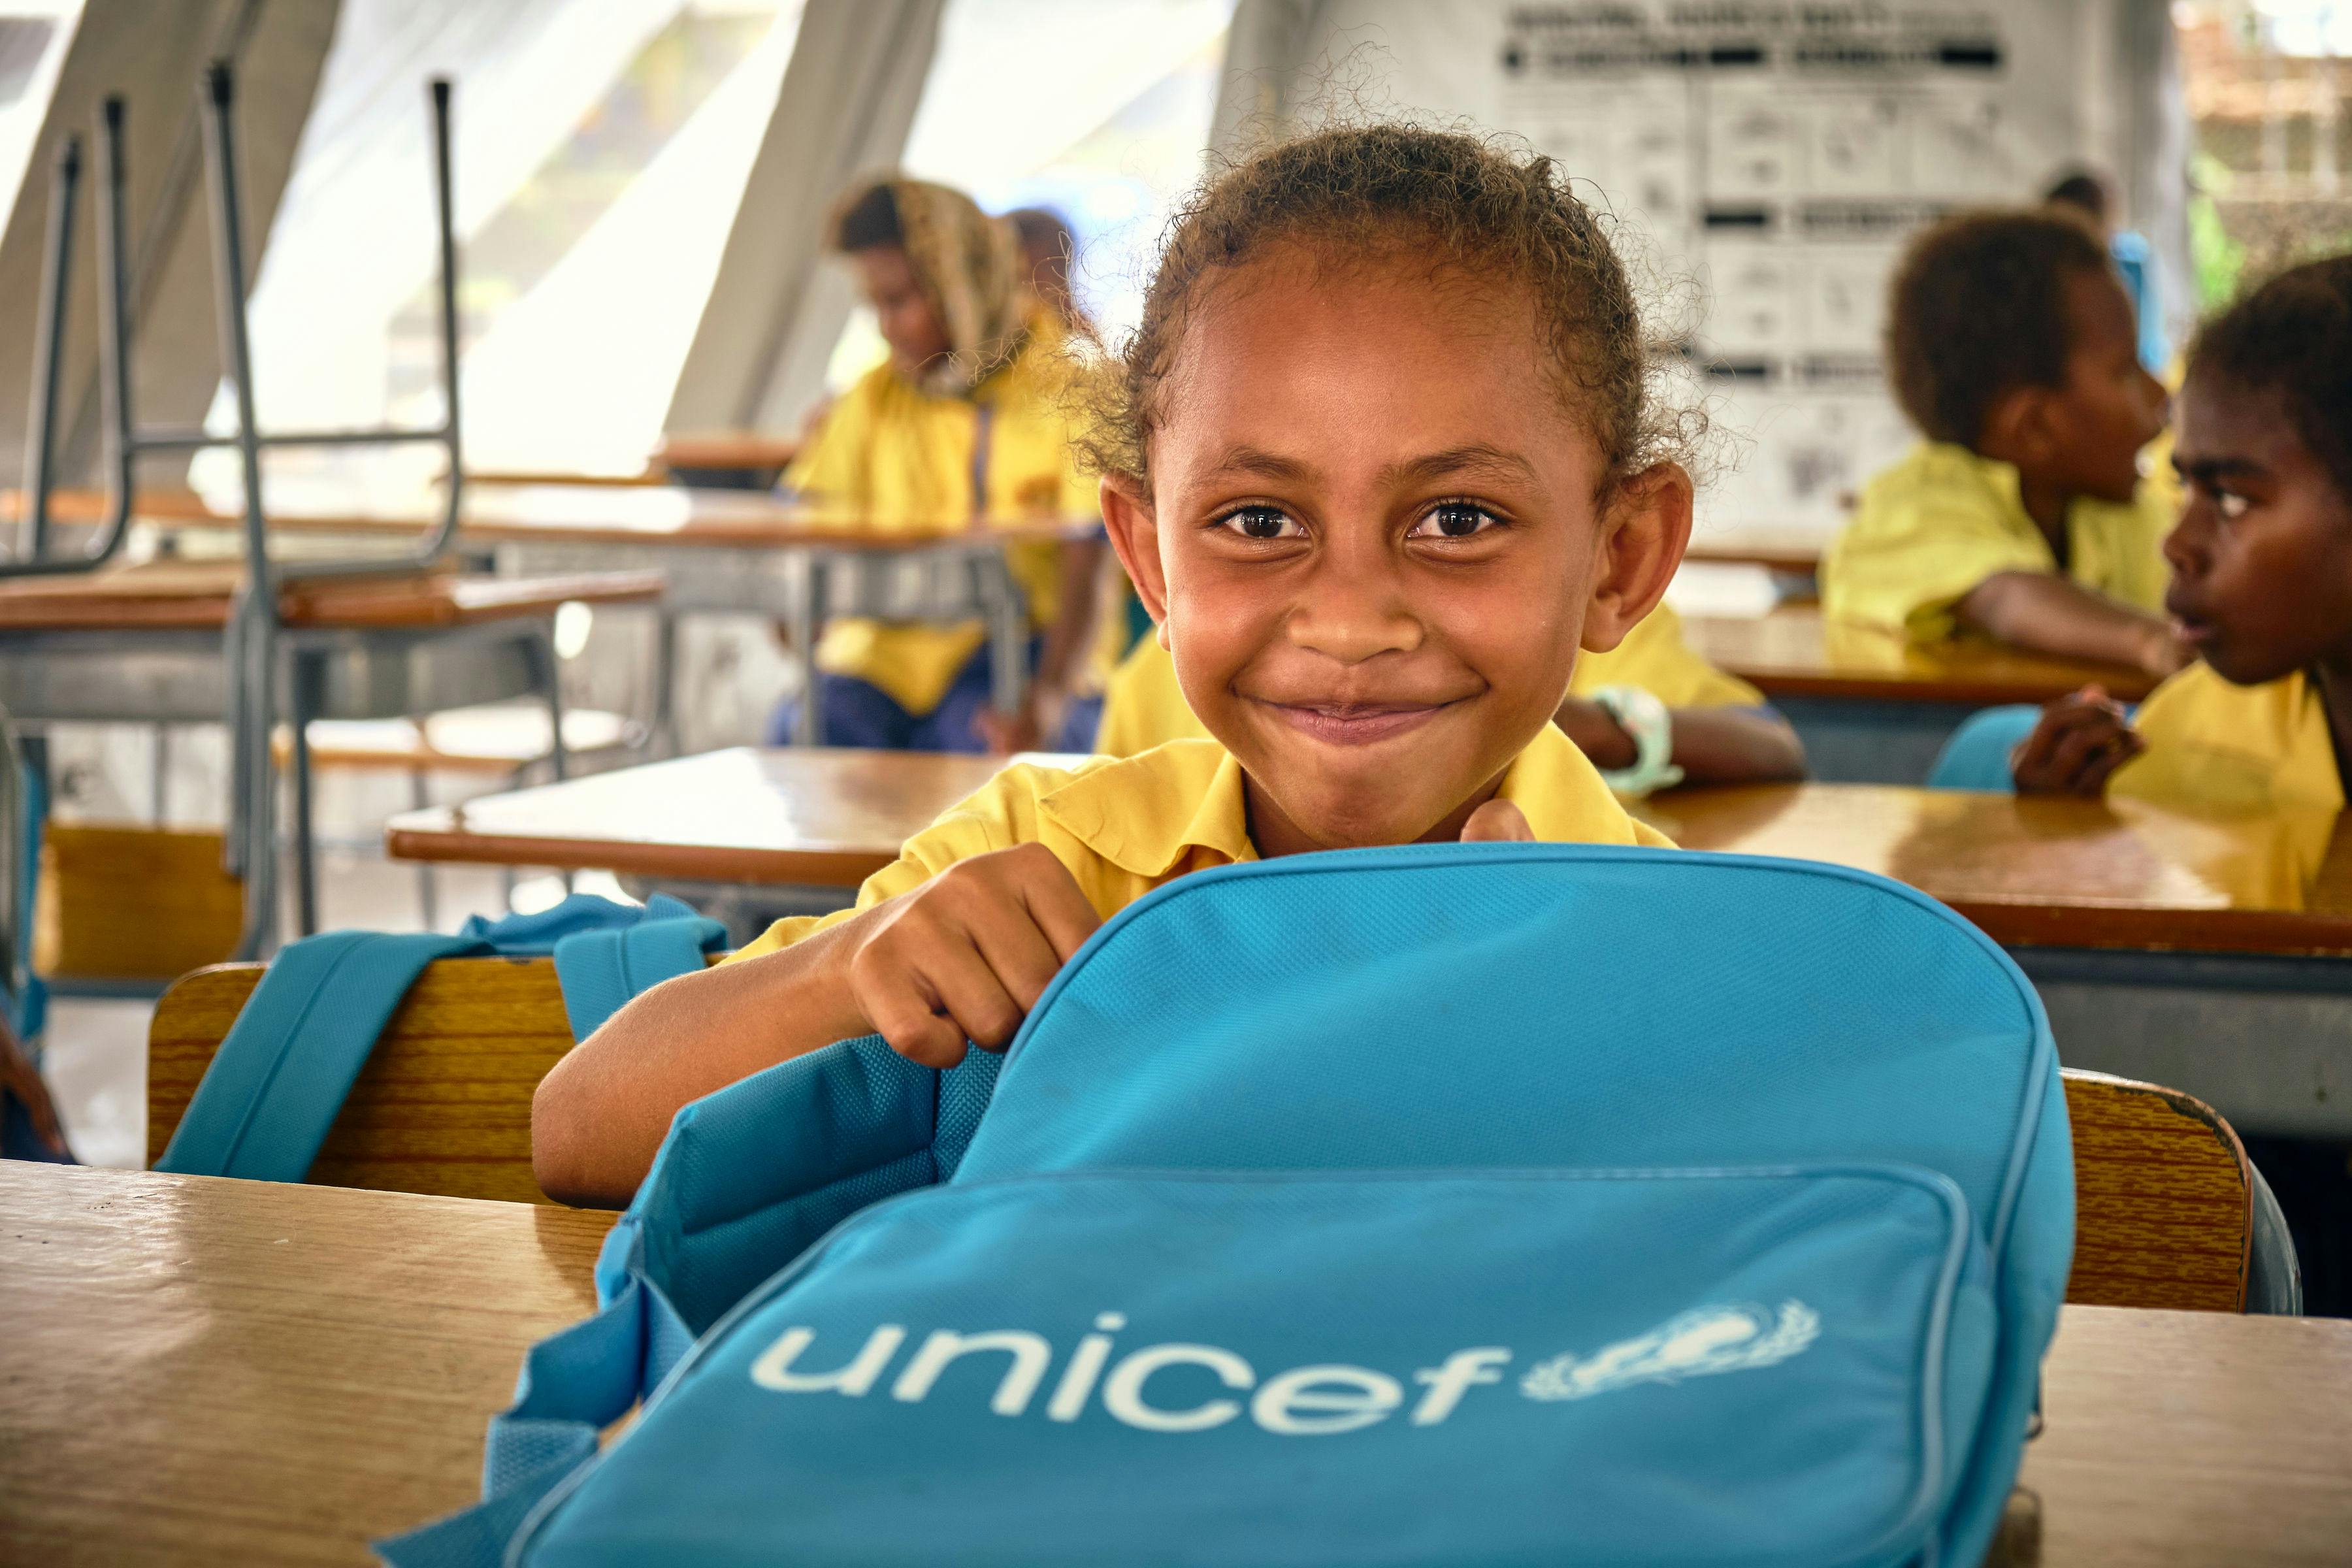 Keziah Vatoko (7 yrs) who is in class 3 at École Publique Centre Ville is excited to open her UNICEF backpack. 